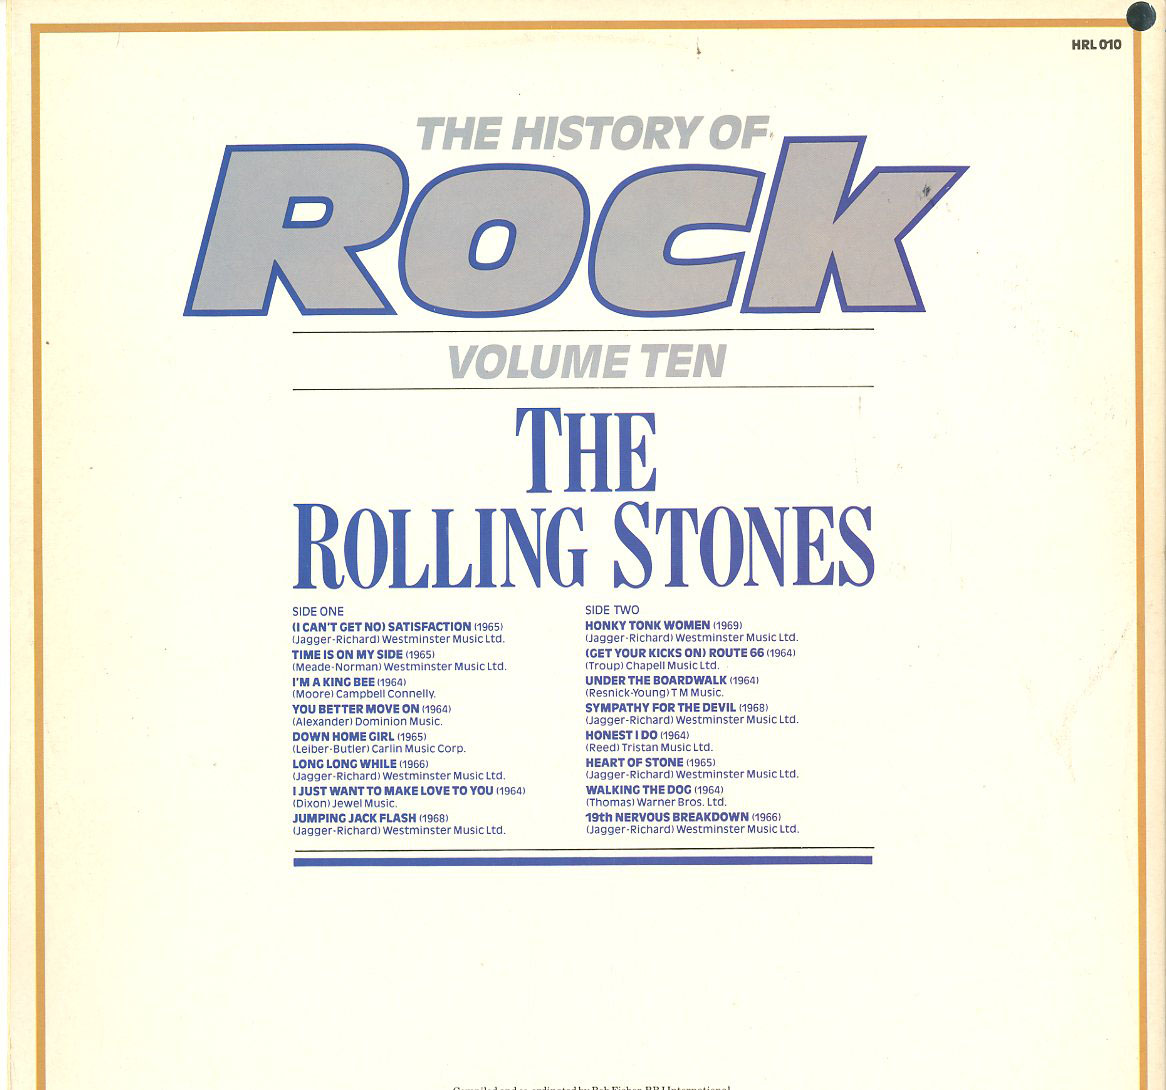 Albumcover The Rolling Stones - The History 0f Rock Volume Ten: The Rolling Stones